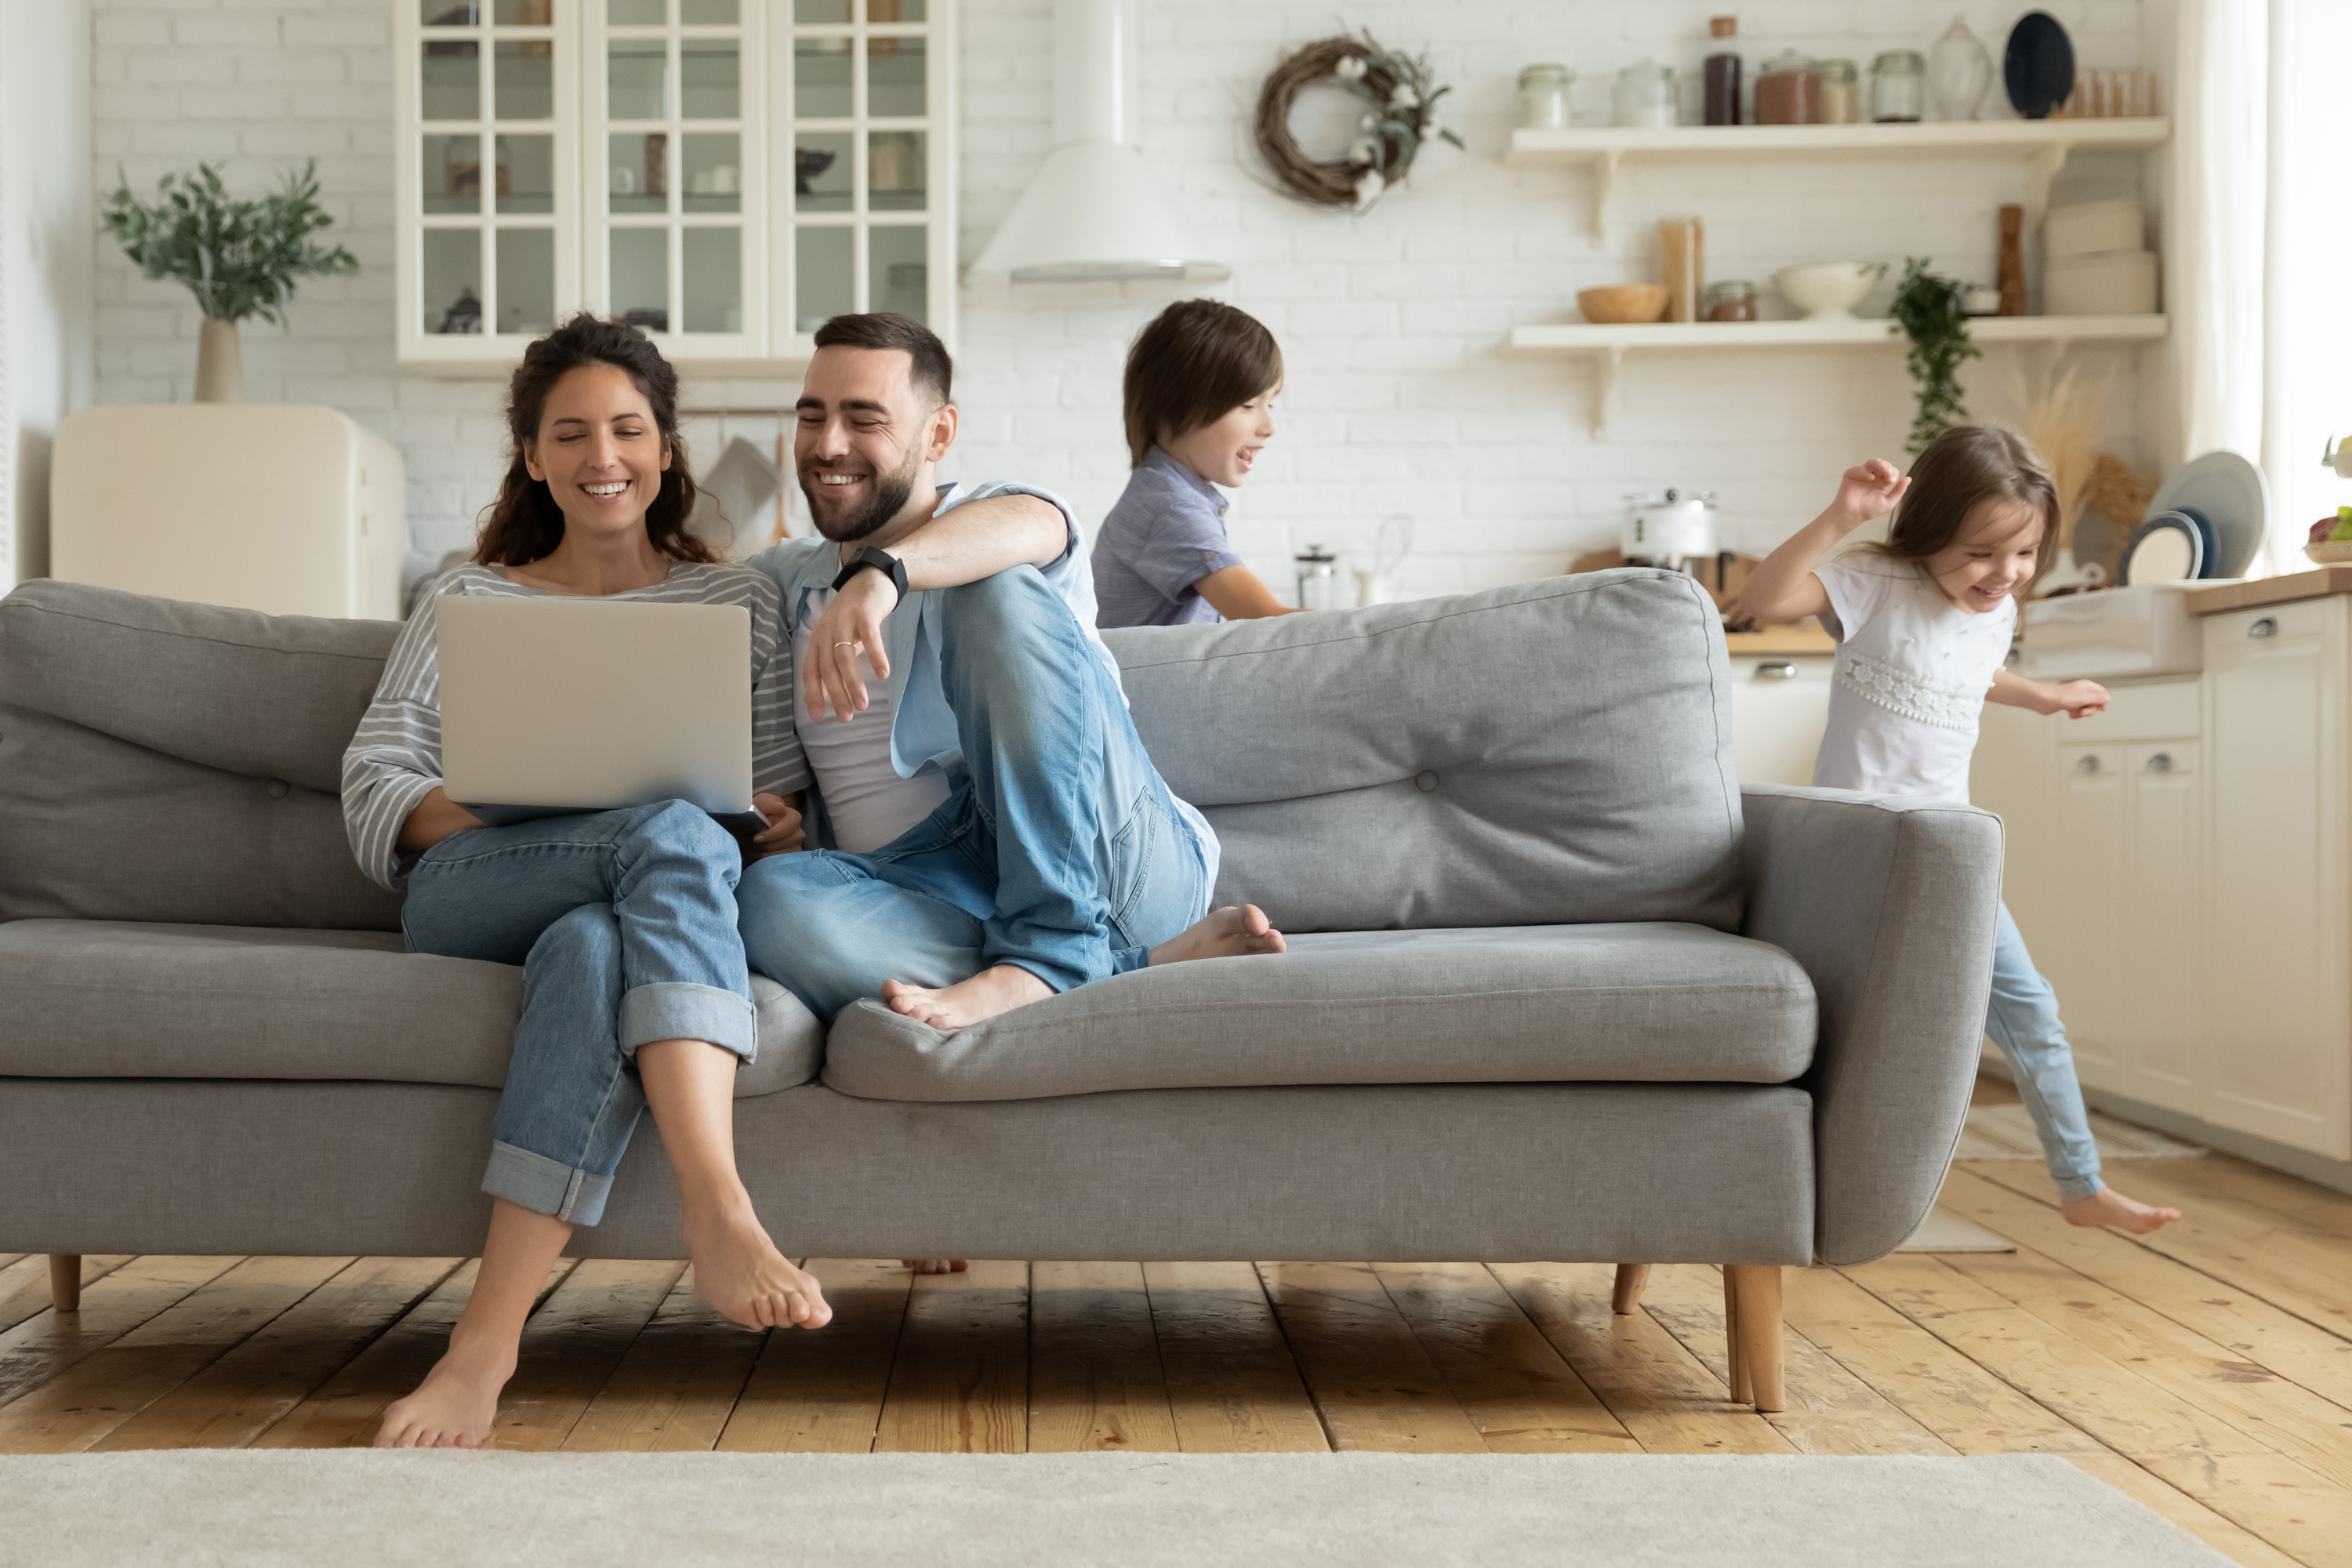 Couple sitting couch looking at a laptop while kids run in the kitchen